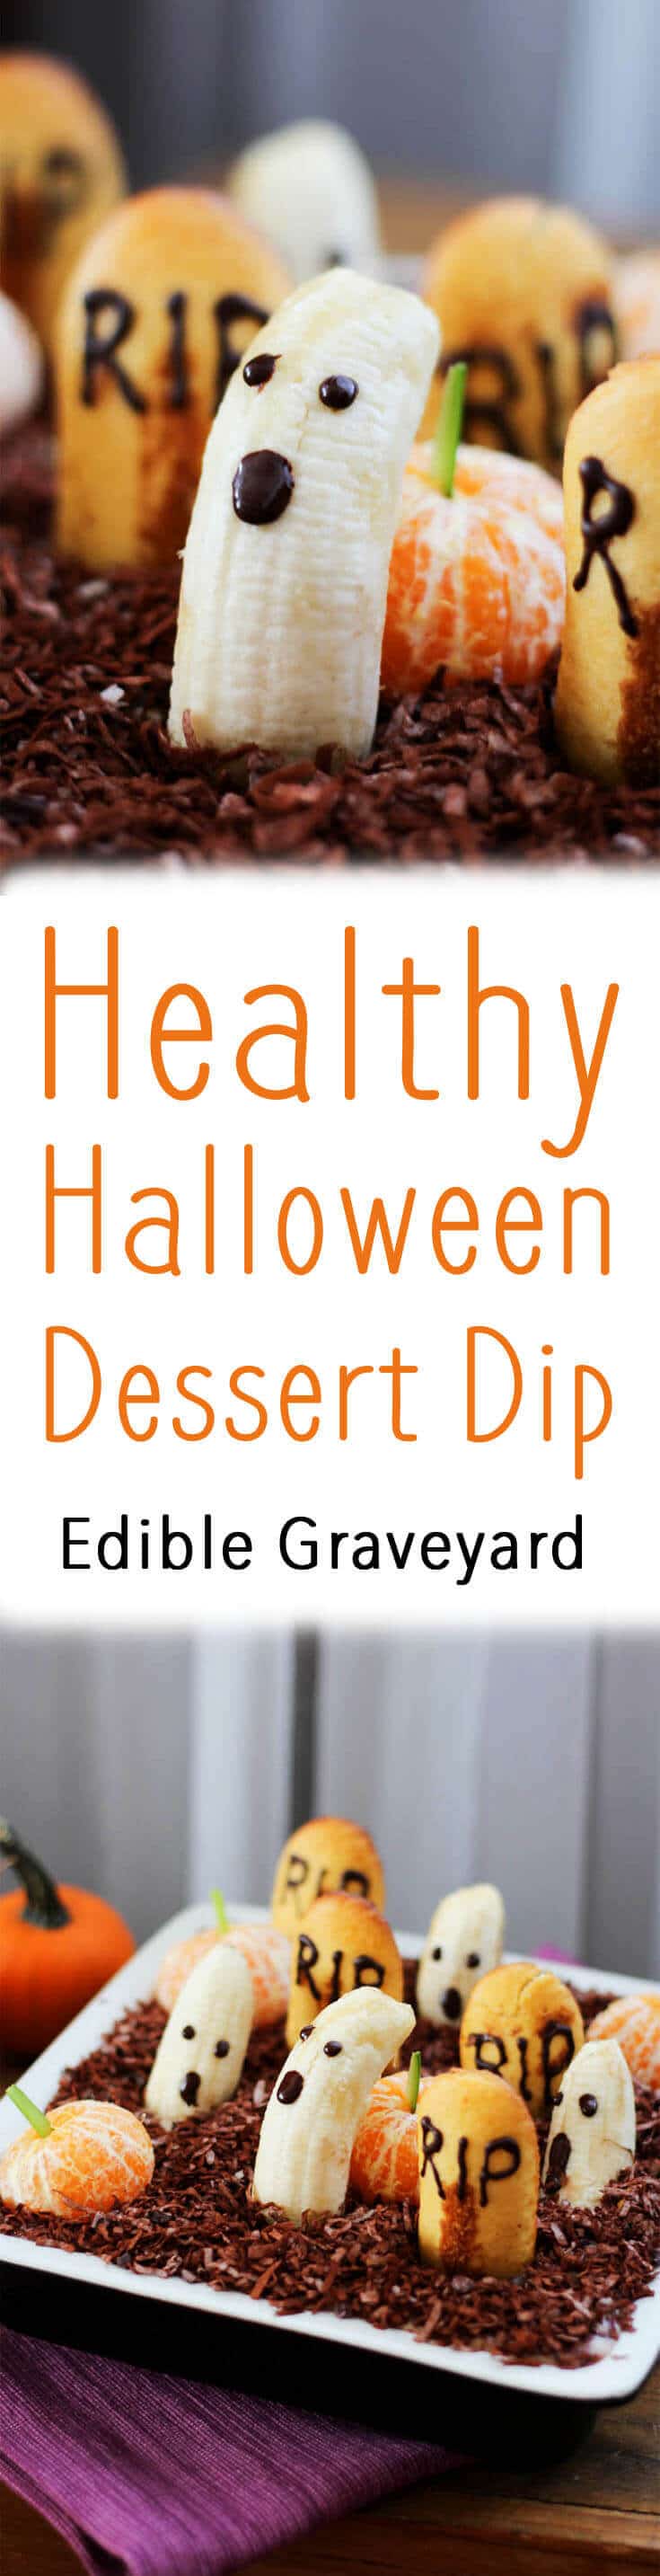 A pinterest image of an edible grave with the text overlay \"Healthy Halloween Dessert Dip Edible Graveyard.\"